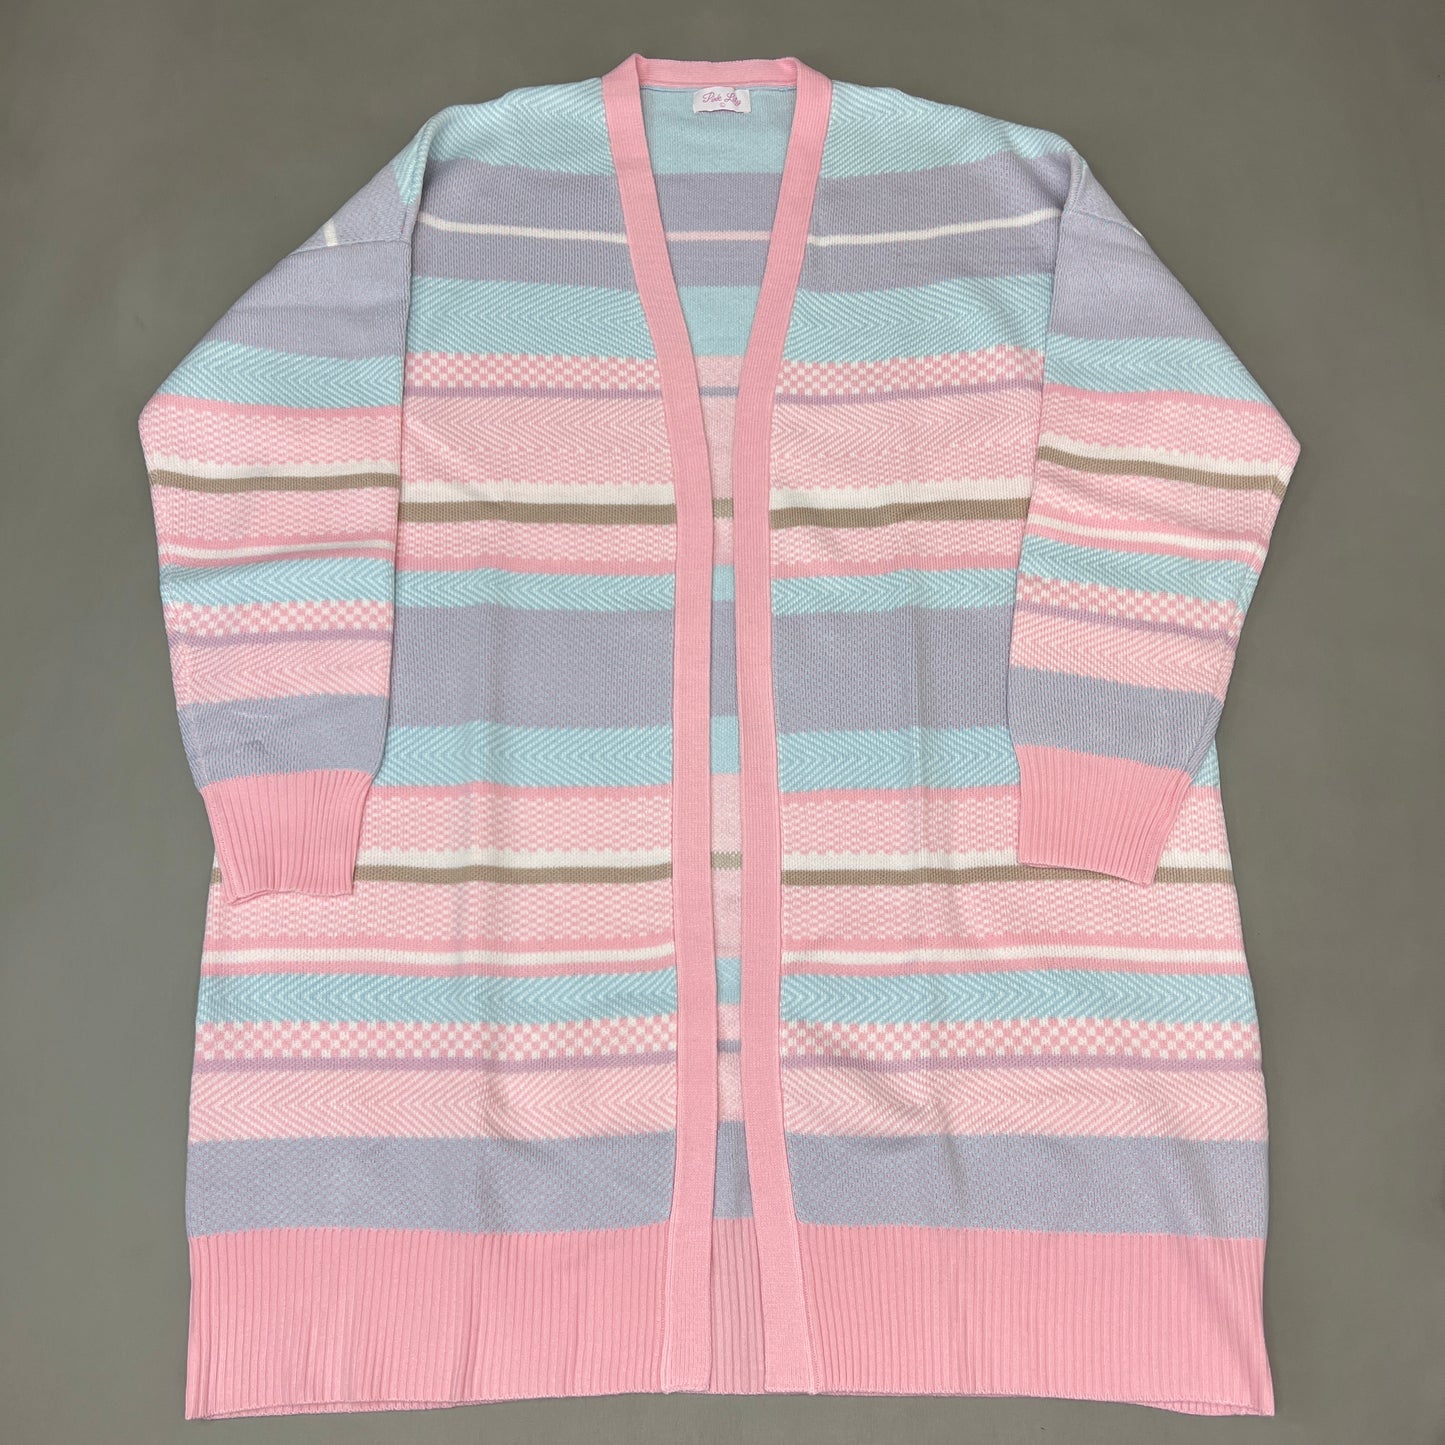 PINK LILY Multi-colored Striped Sweater Cardigan Women's Sz L PL930 (New)